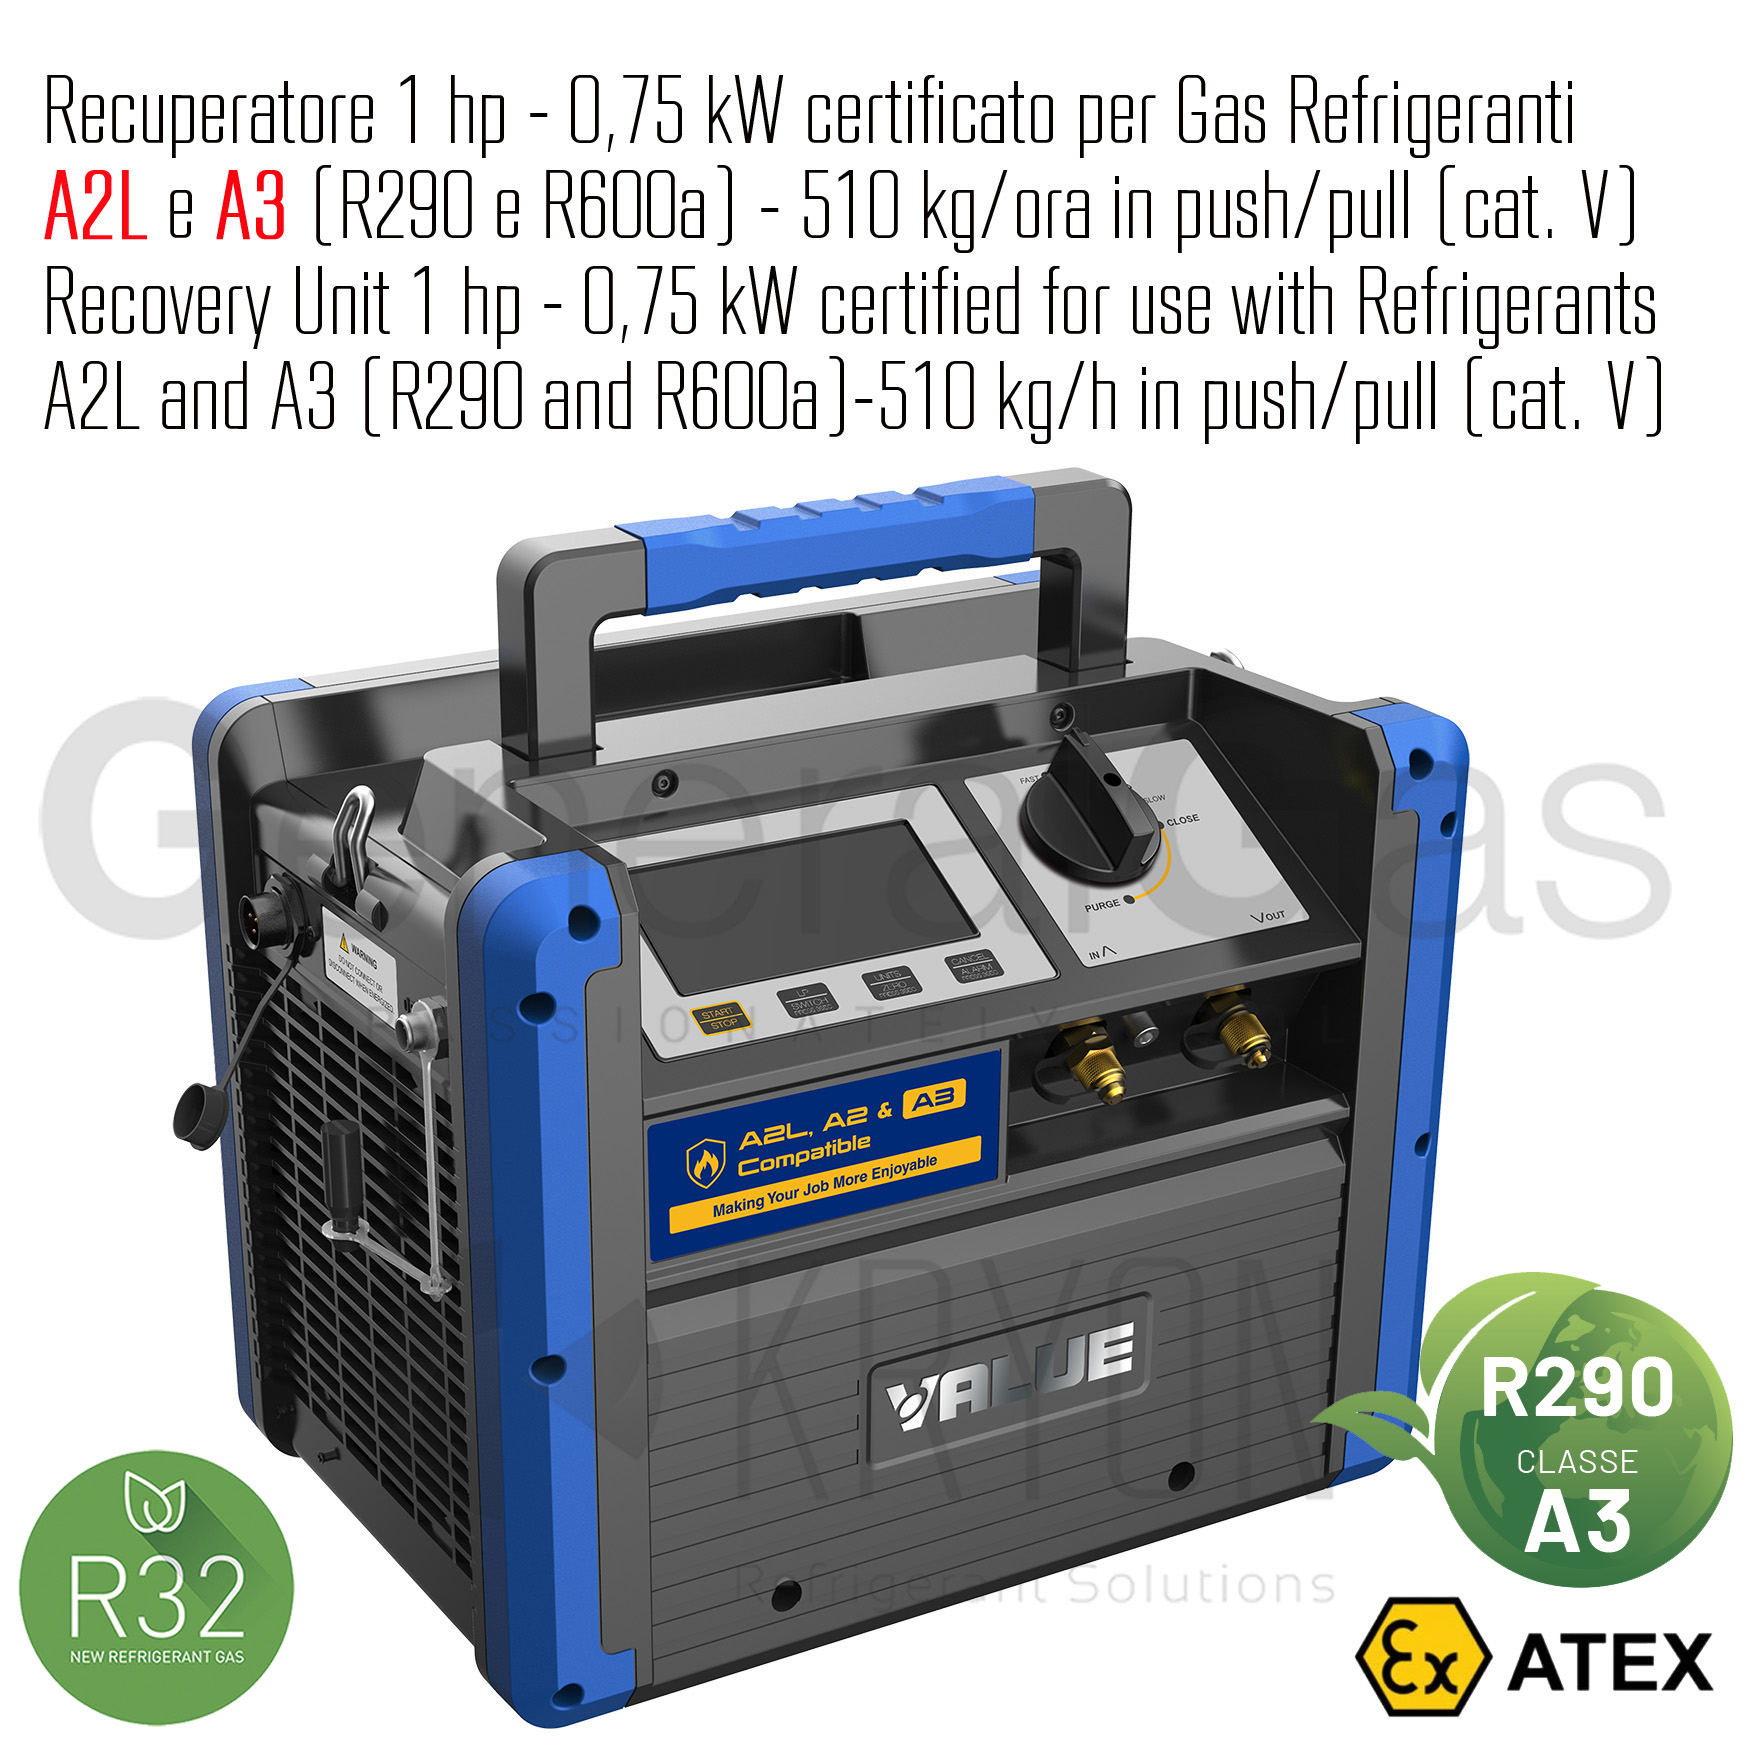 VALUE VRDDF - Recovery unit for flammable refrigerants 1 HP-0,75 KW, 510 kg/hour in push/pull, suitable for  A2L and A3 refrigerants (propane R290) - ATEX certified